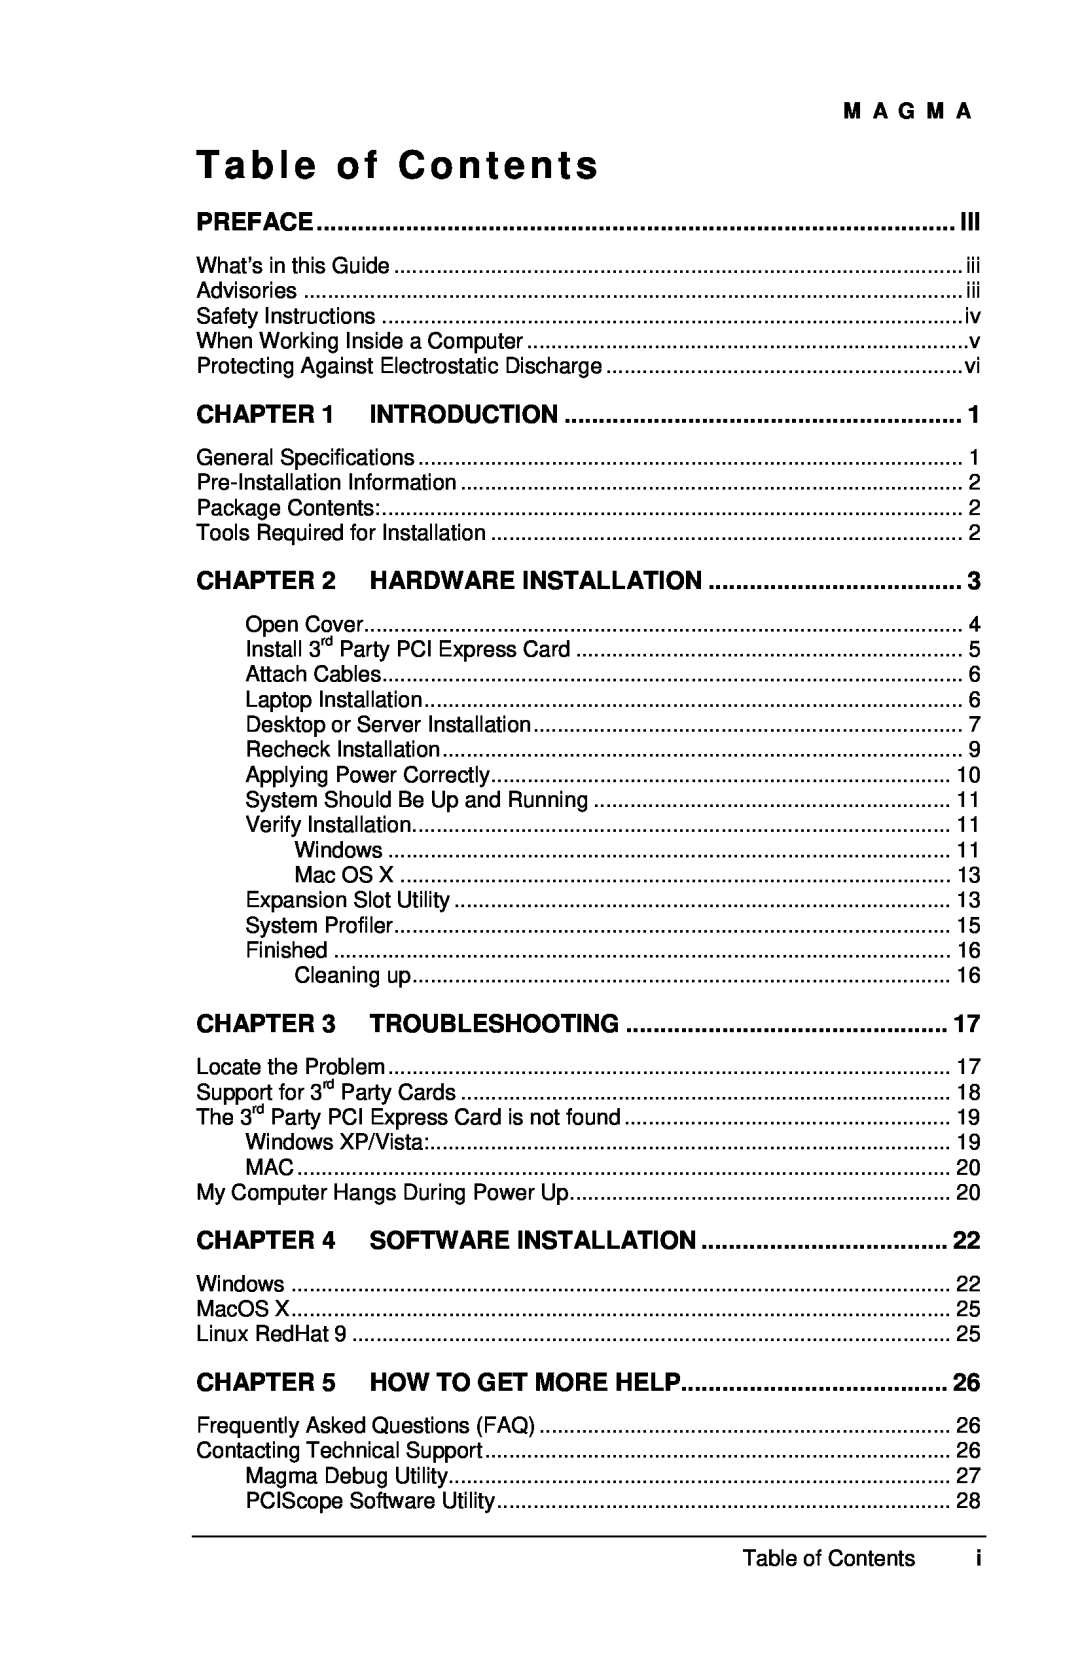 Compaq EB1F, EB1H user manual Table of Contents, M A G M A 